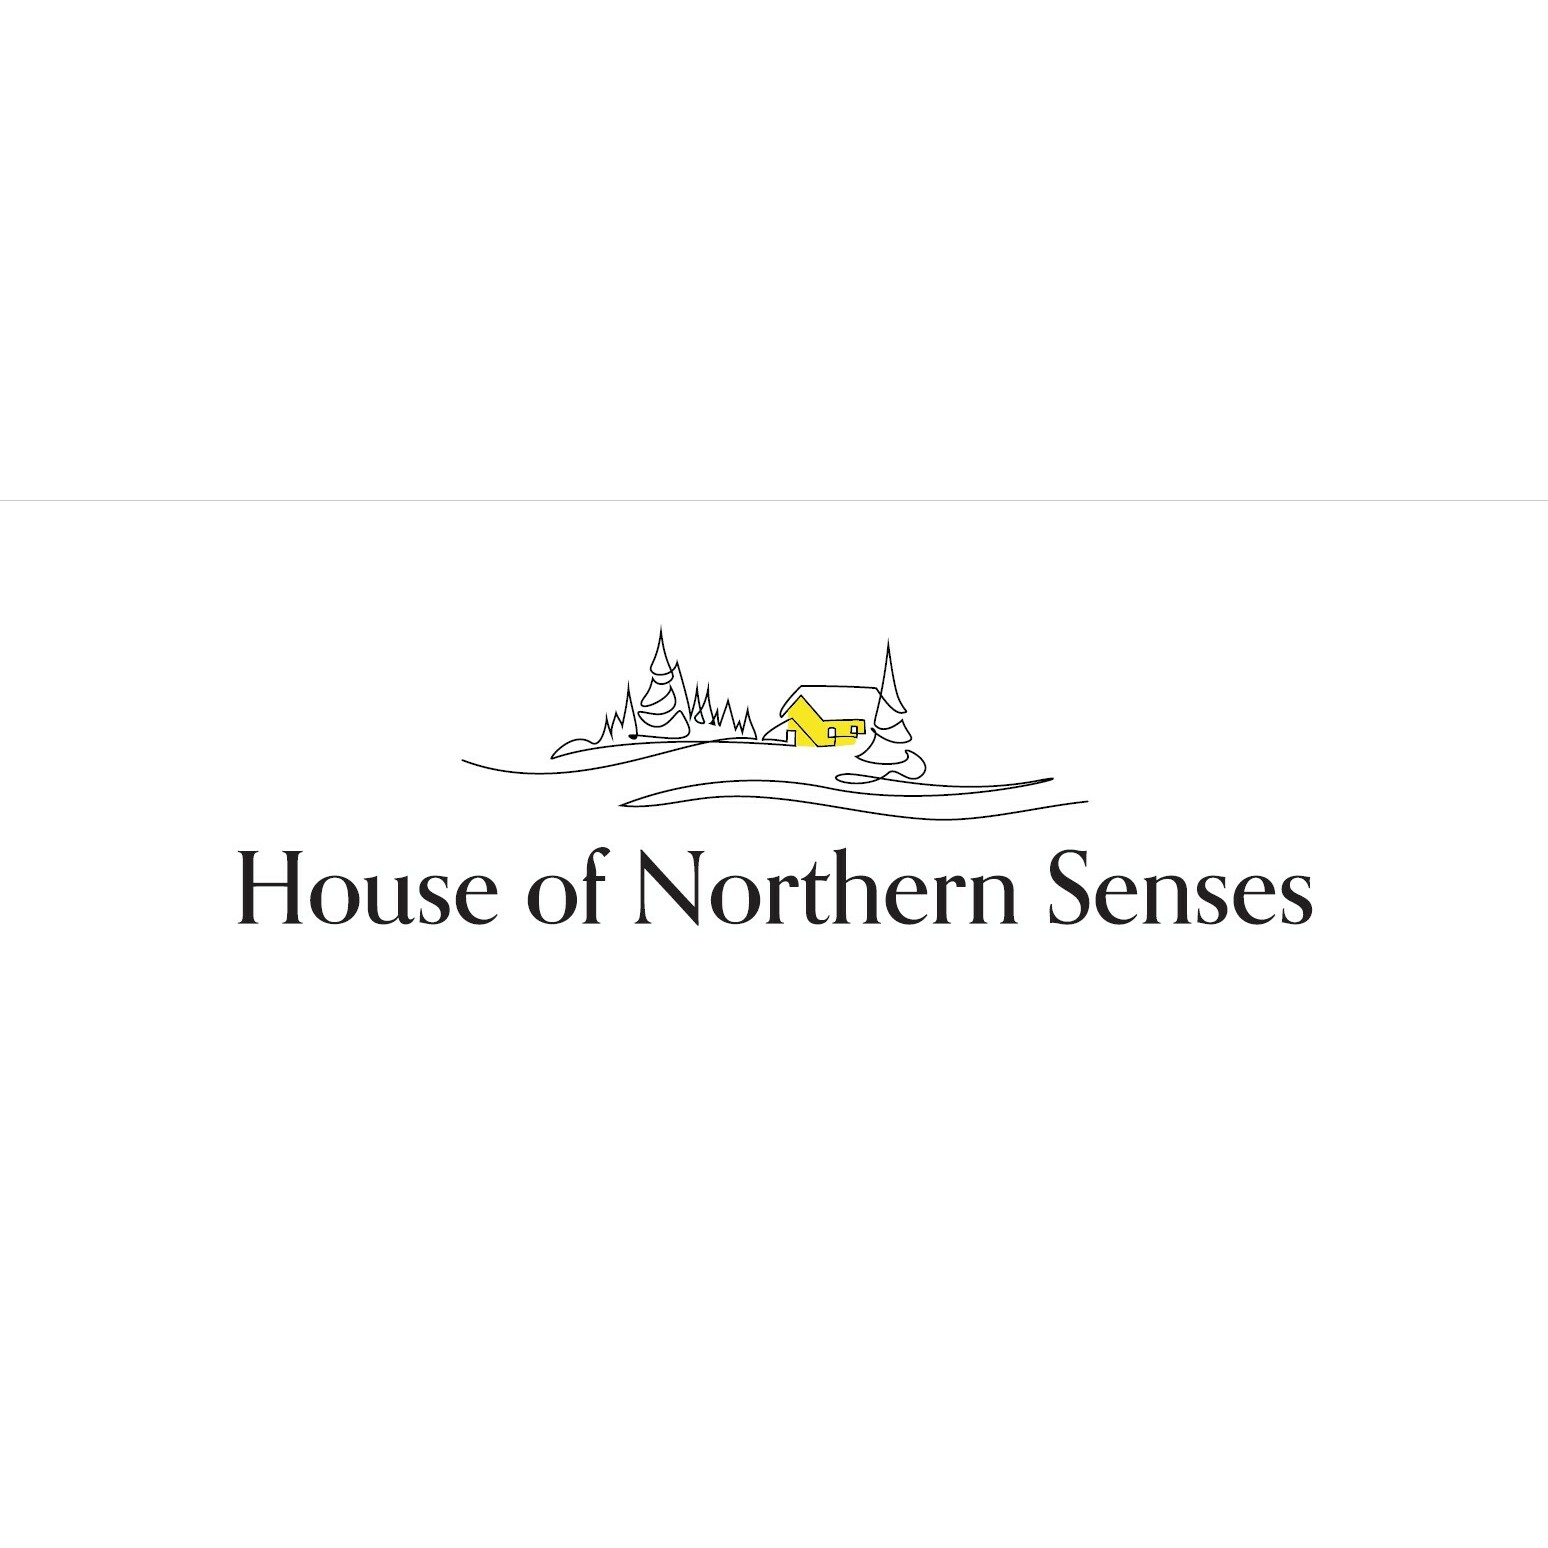 House of Northern Senses